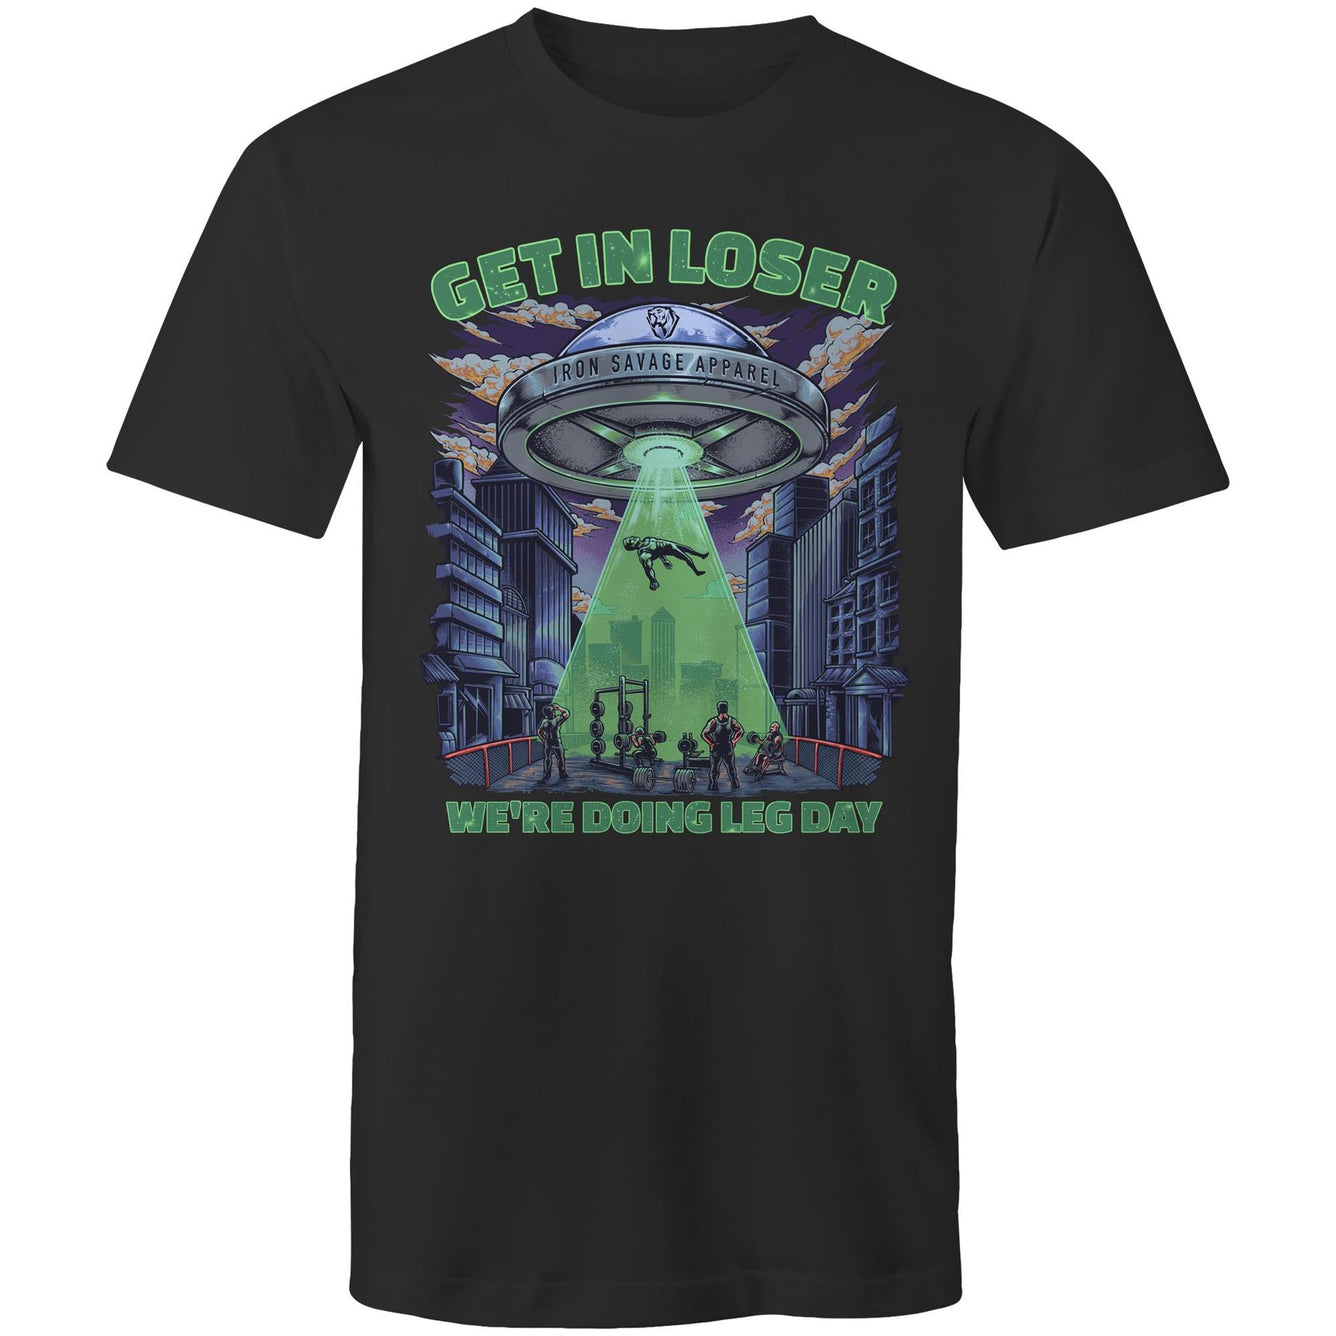 UFO: Get in Loser, We're doing Leg Day T-shirt (AU)